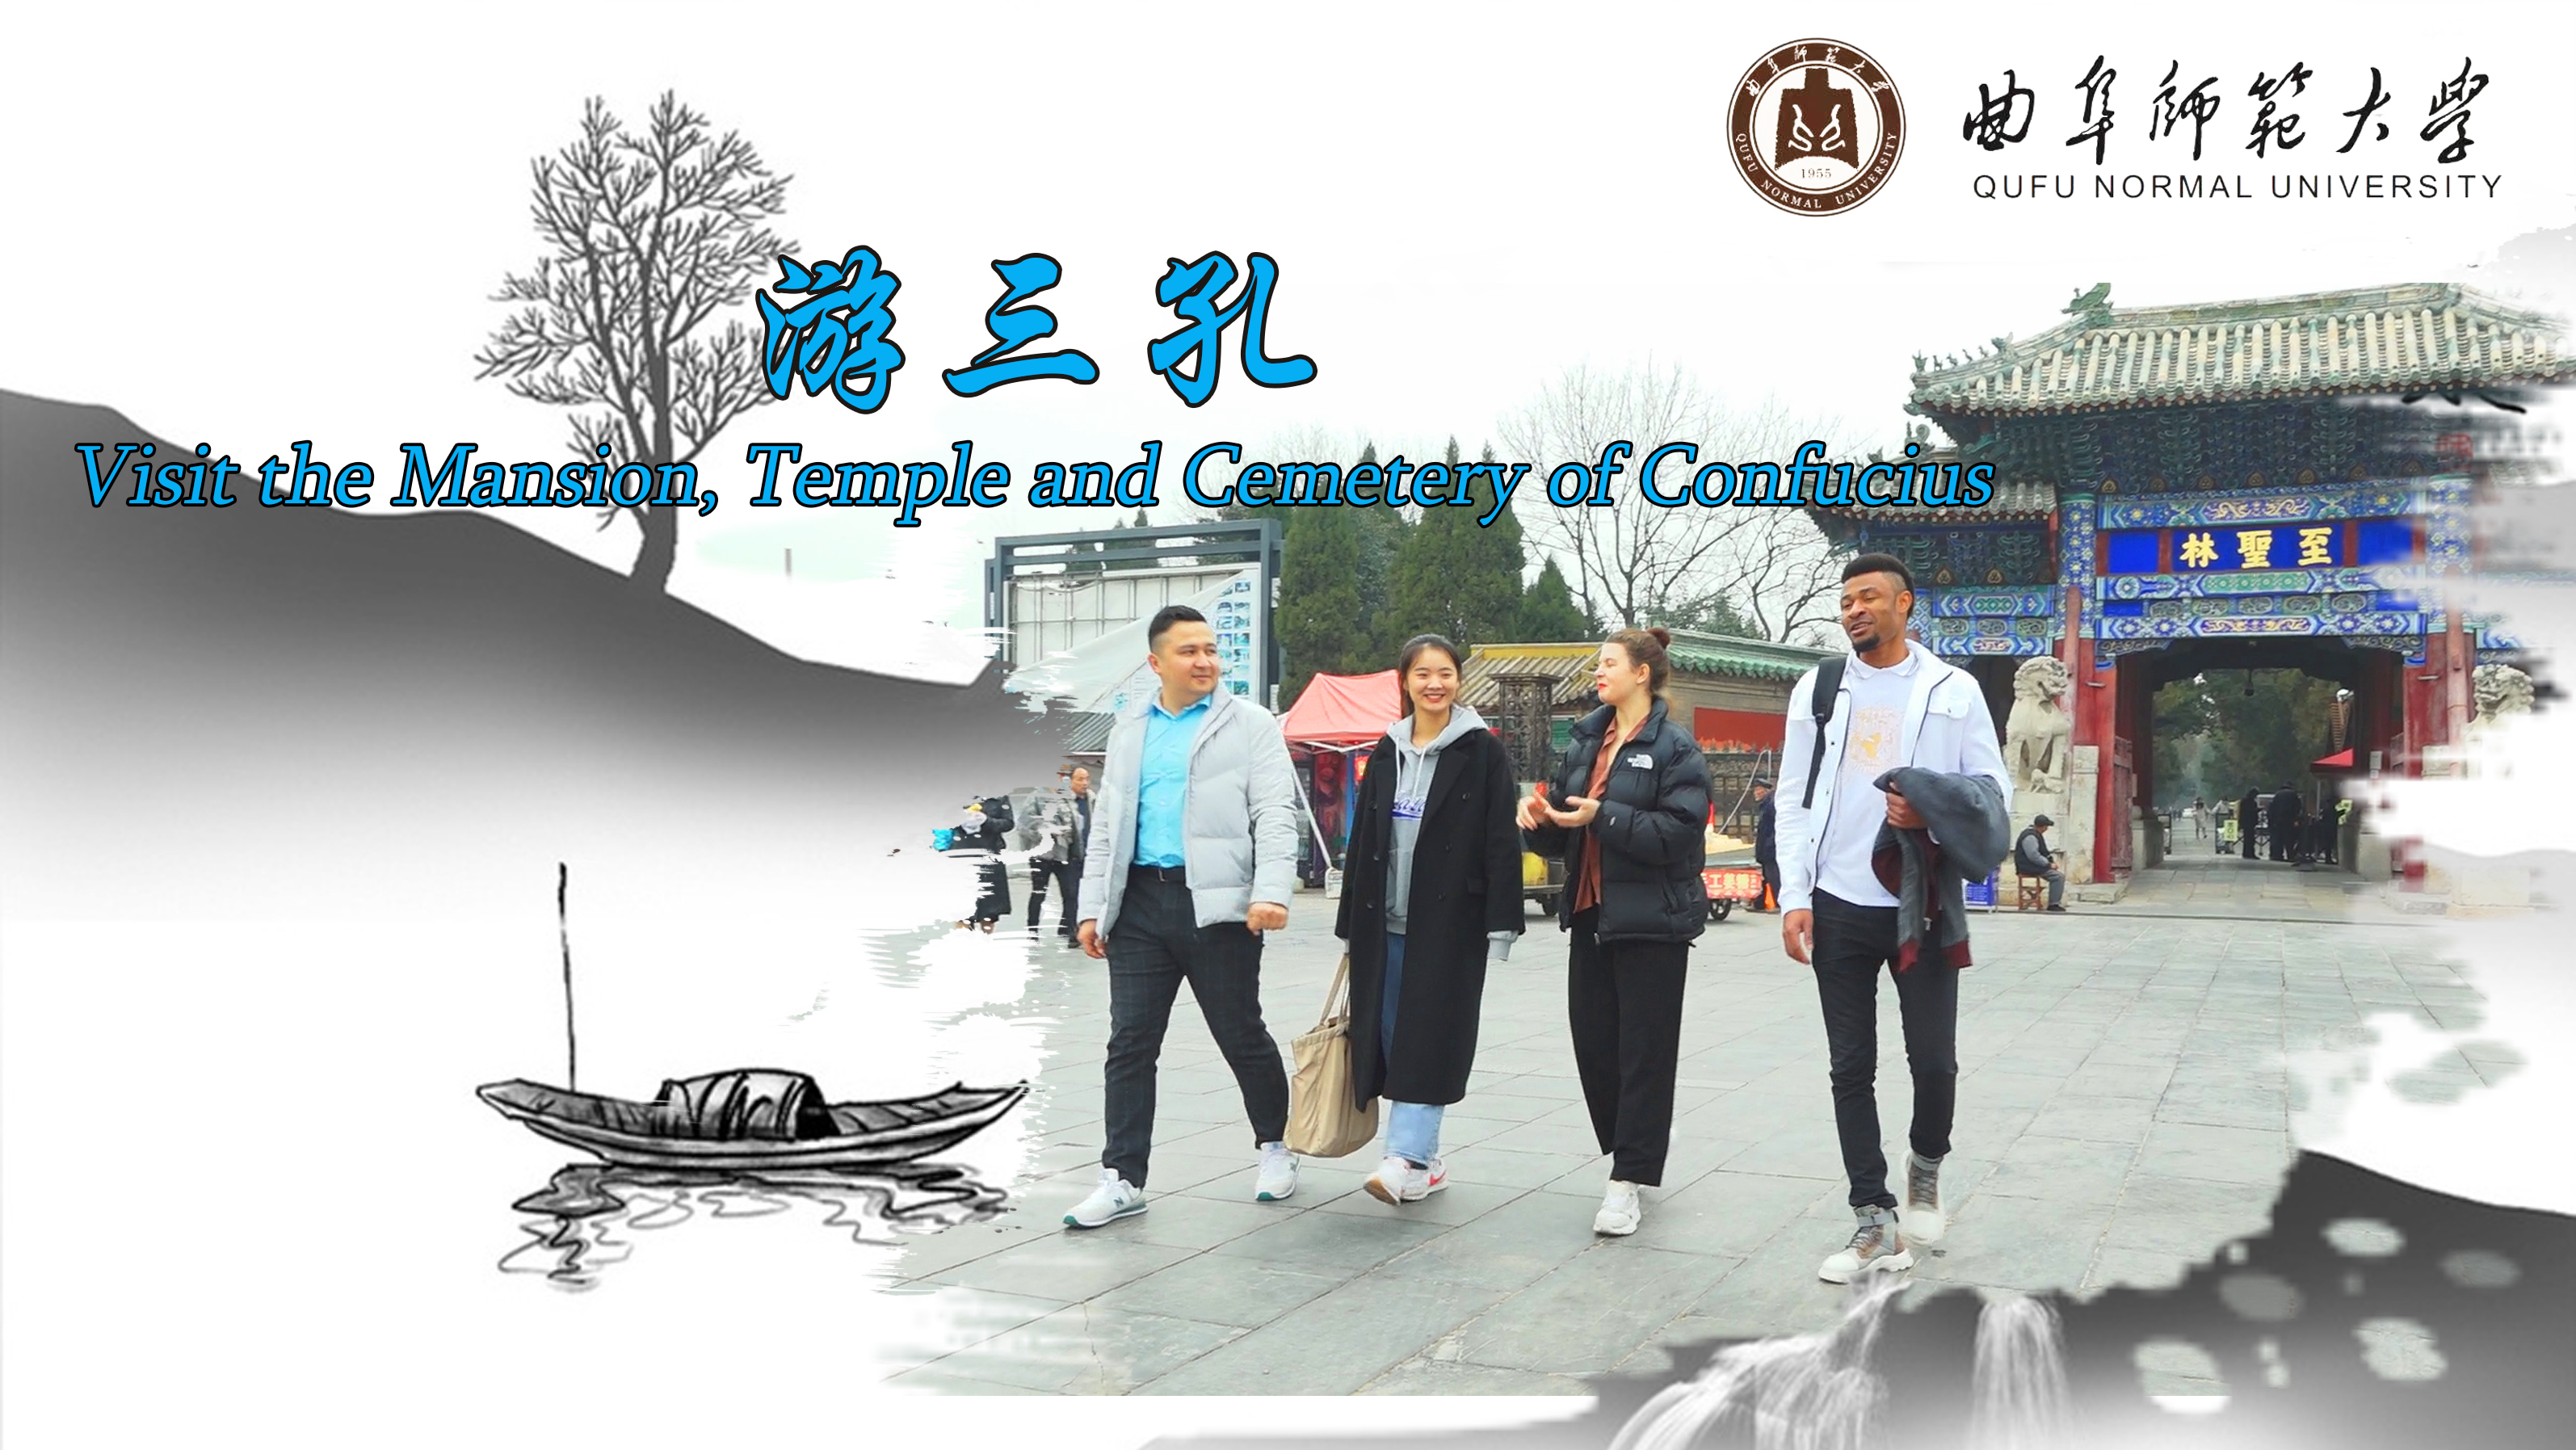 Visit the Mansion, Temple and Cemetery of Confucius